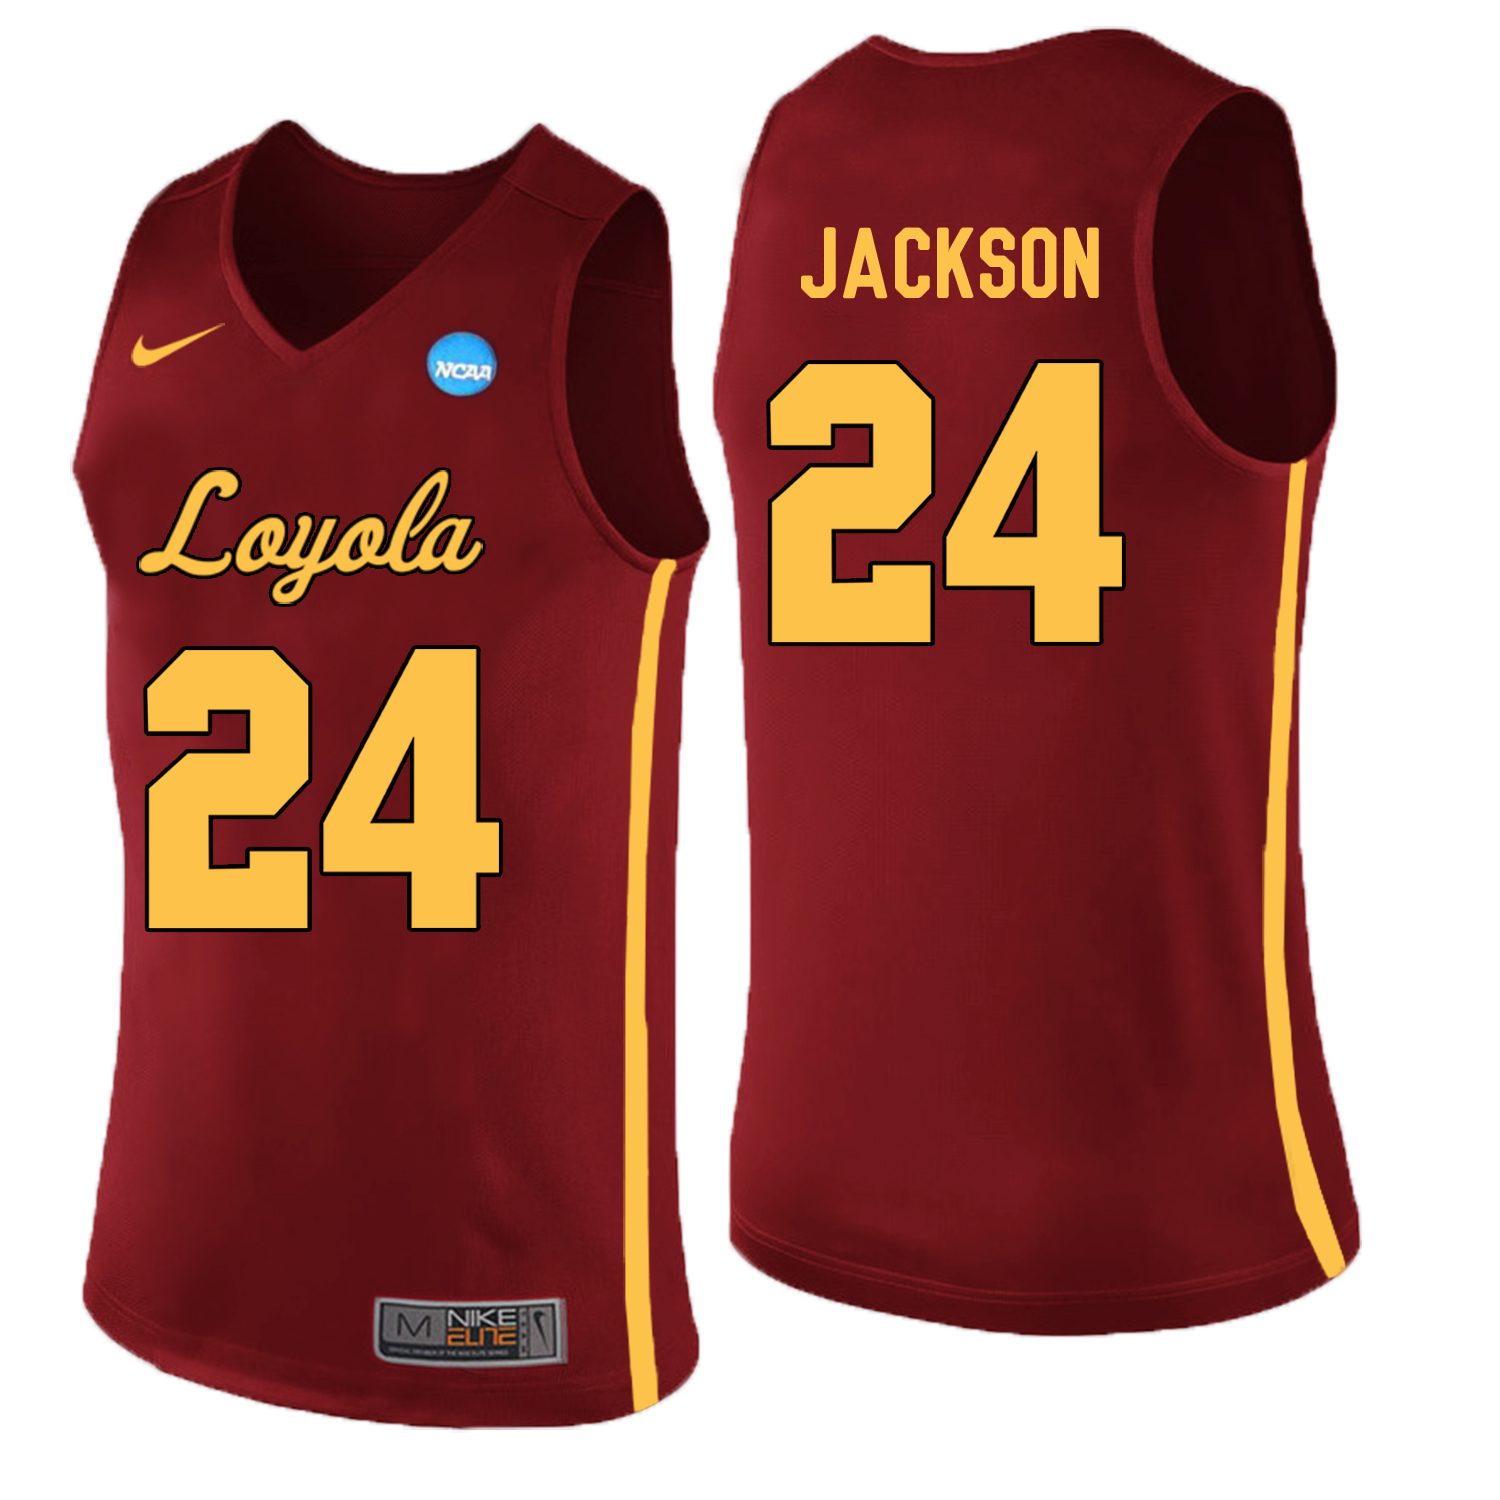 Loyola (Chi) Ramblers 24 Aundre Jackson Red College Basketball Jersey